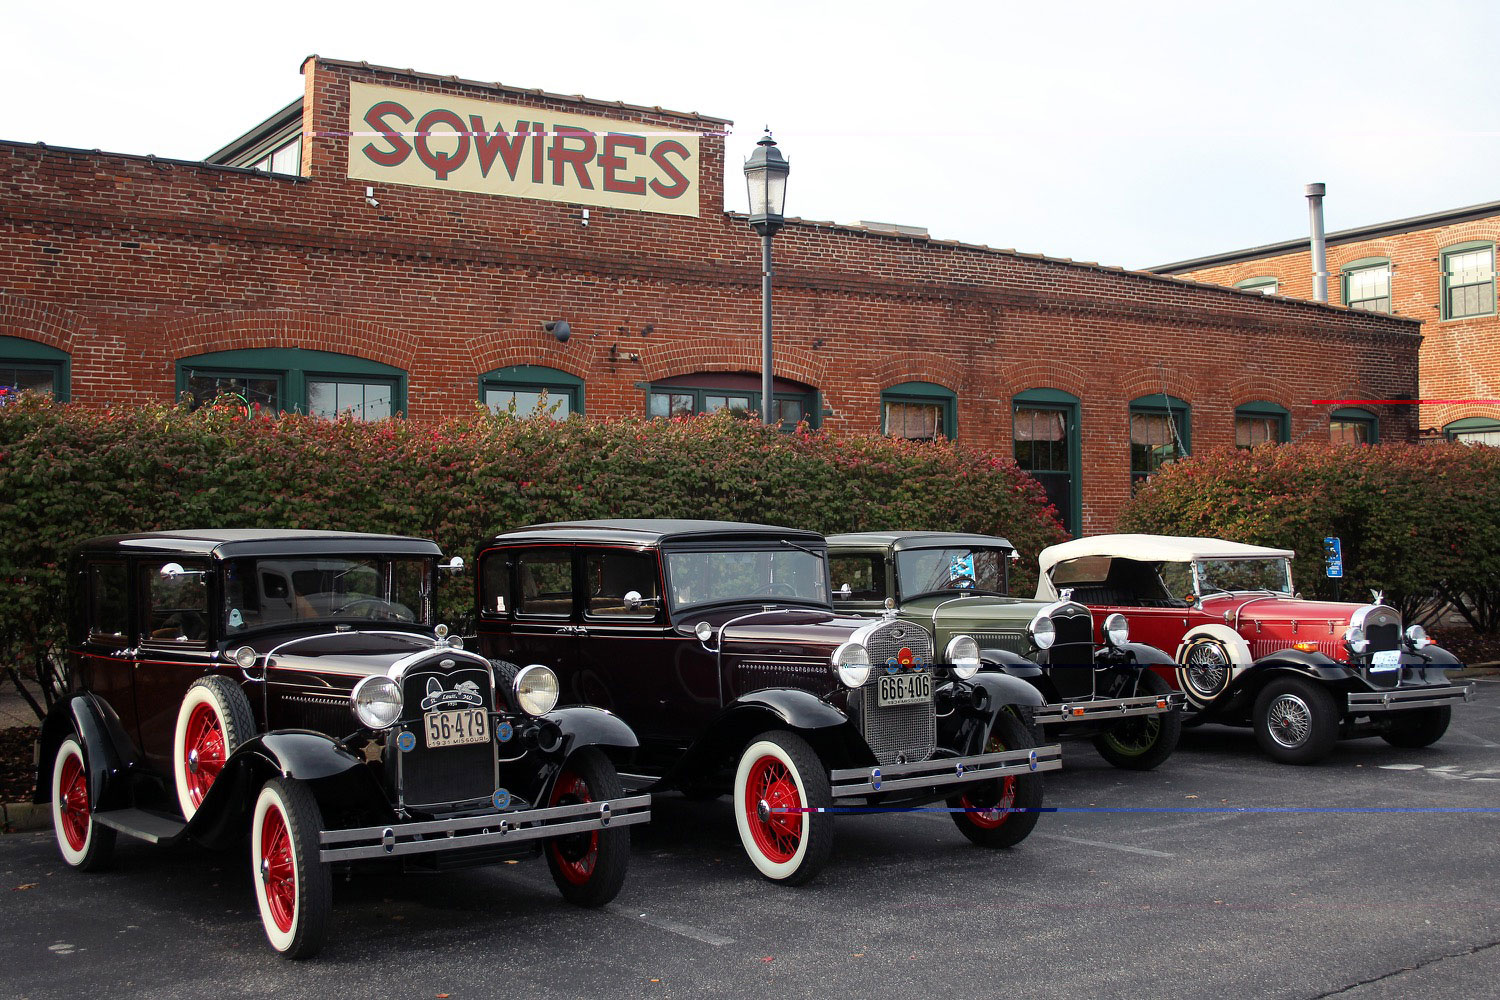   Four more of the Model A's  